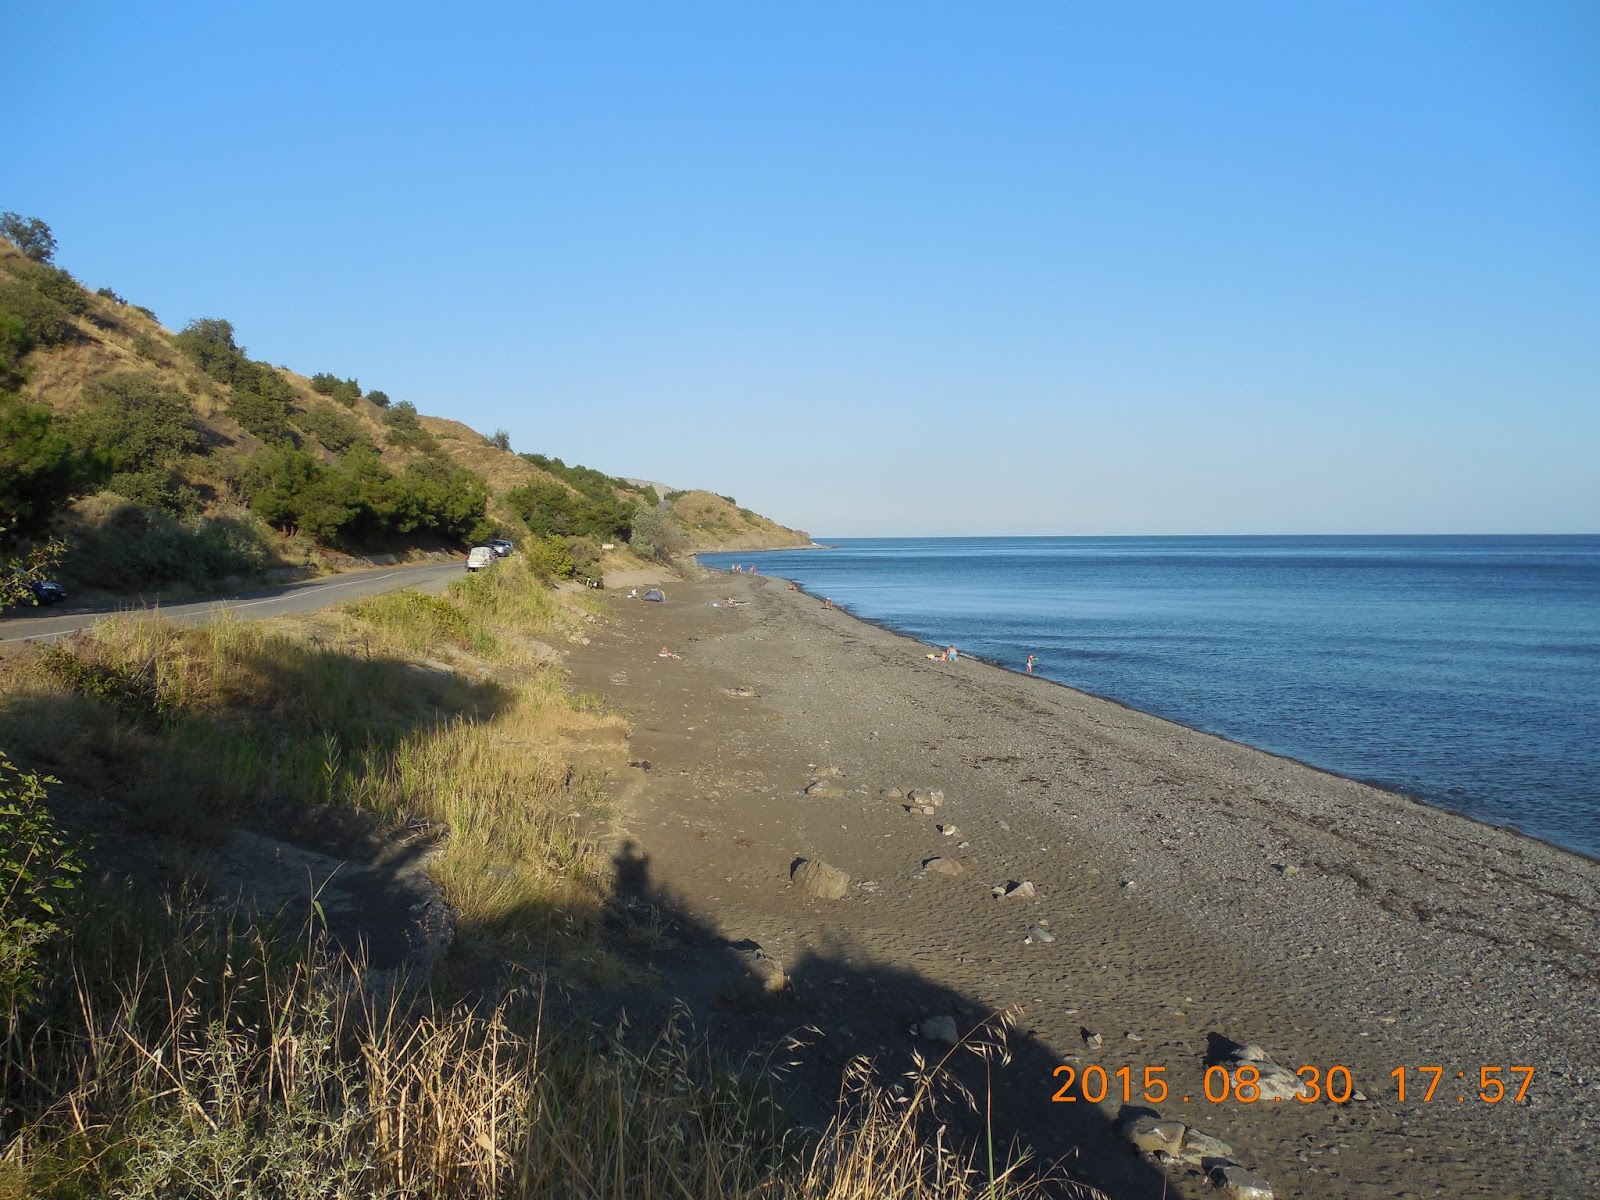 Photo of Morskoe wild beach with gray pebble surface